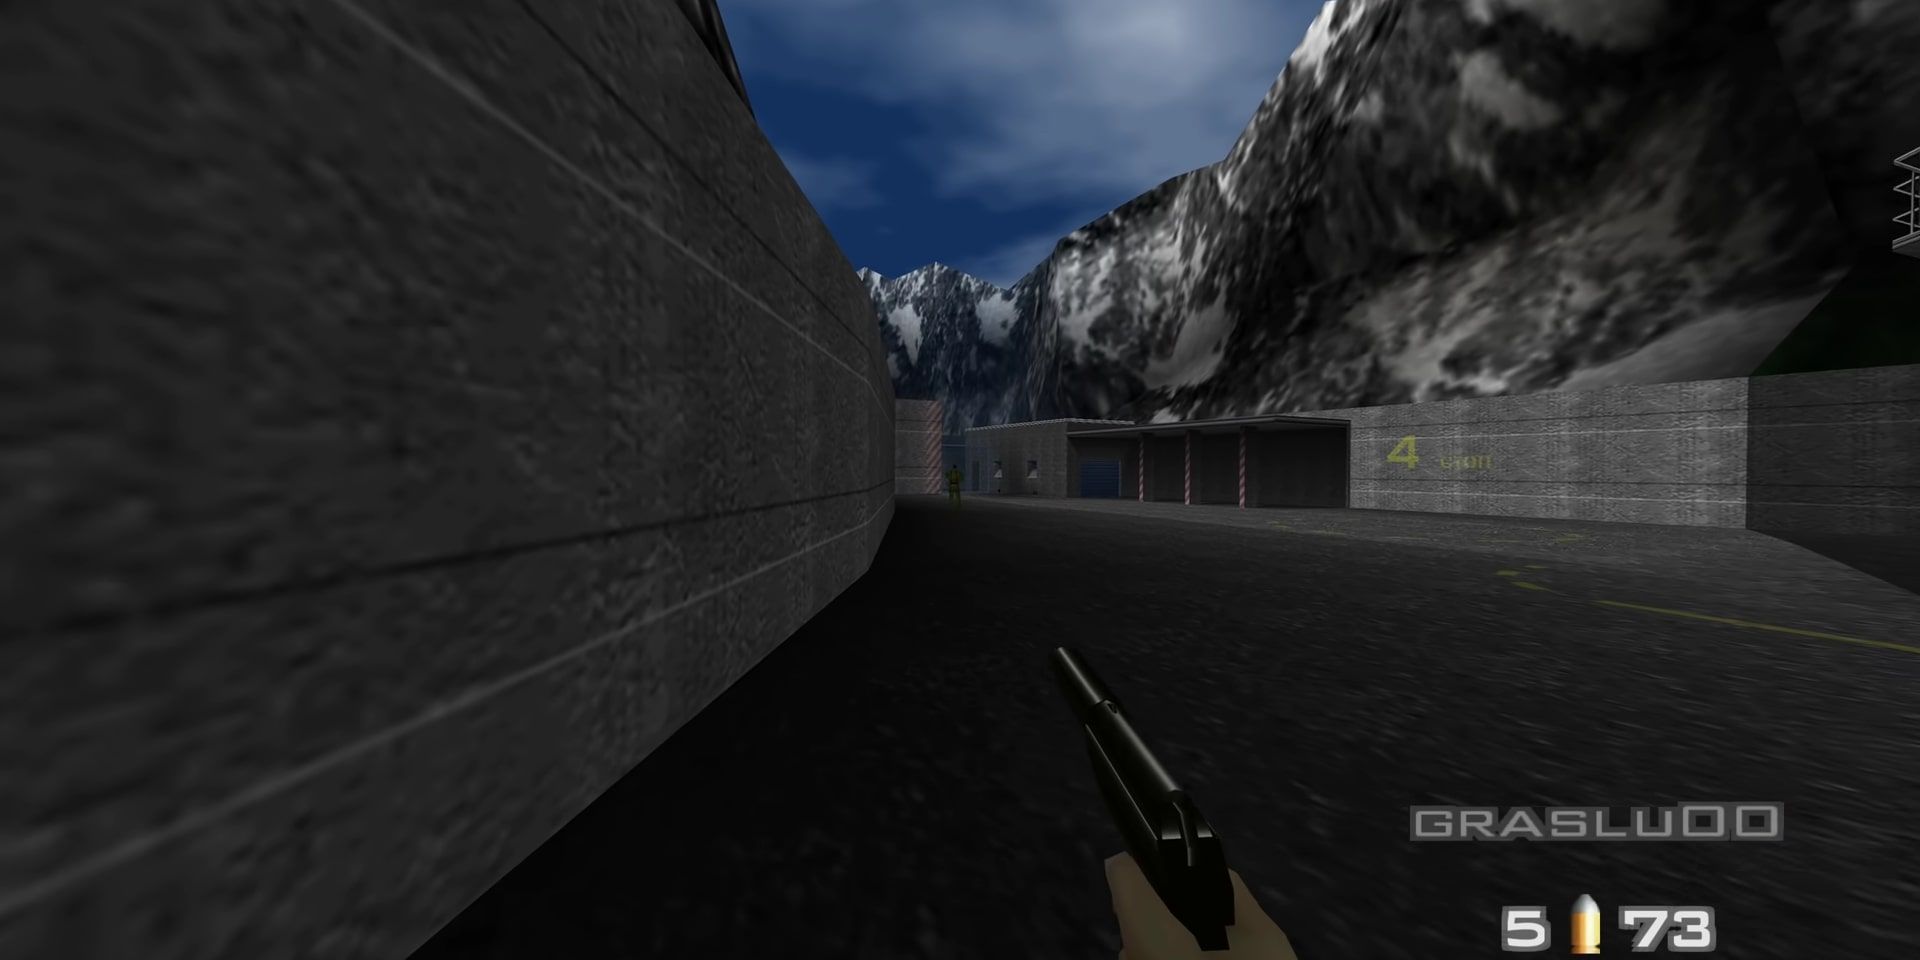 007 running around the exterior of the Dam facility near some snowcapped mountains, sights set on a guard.